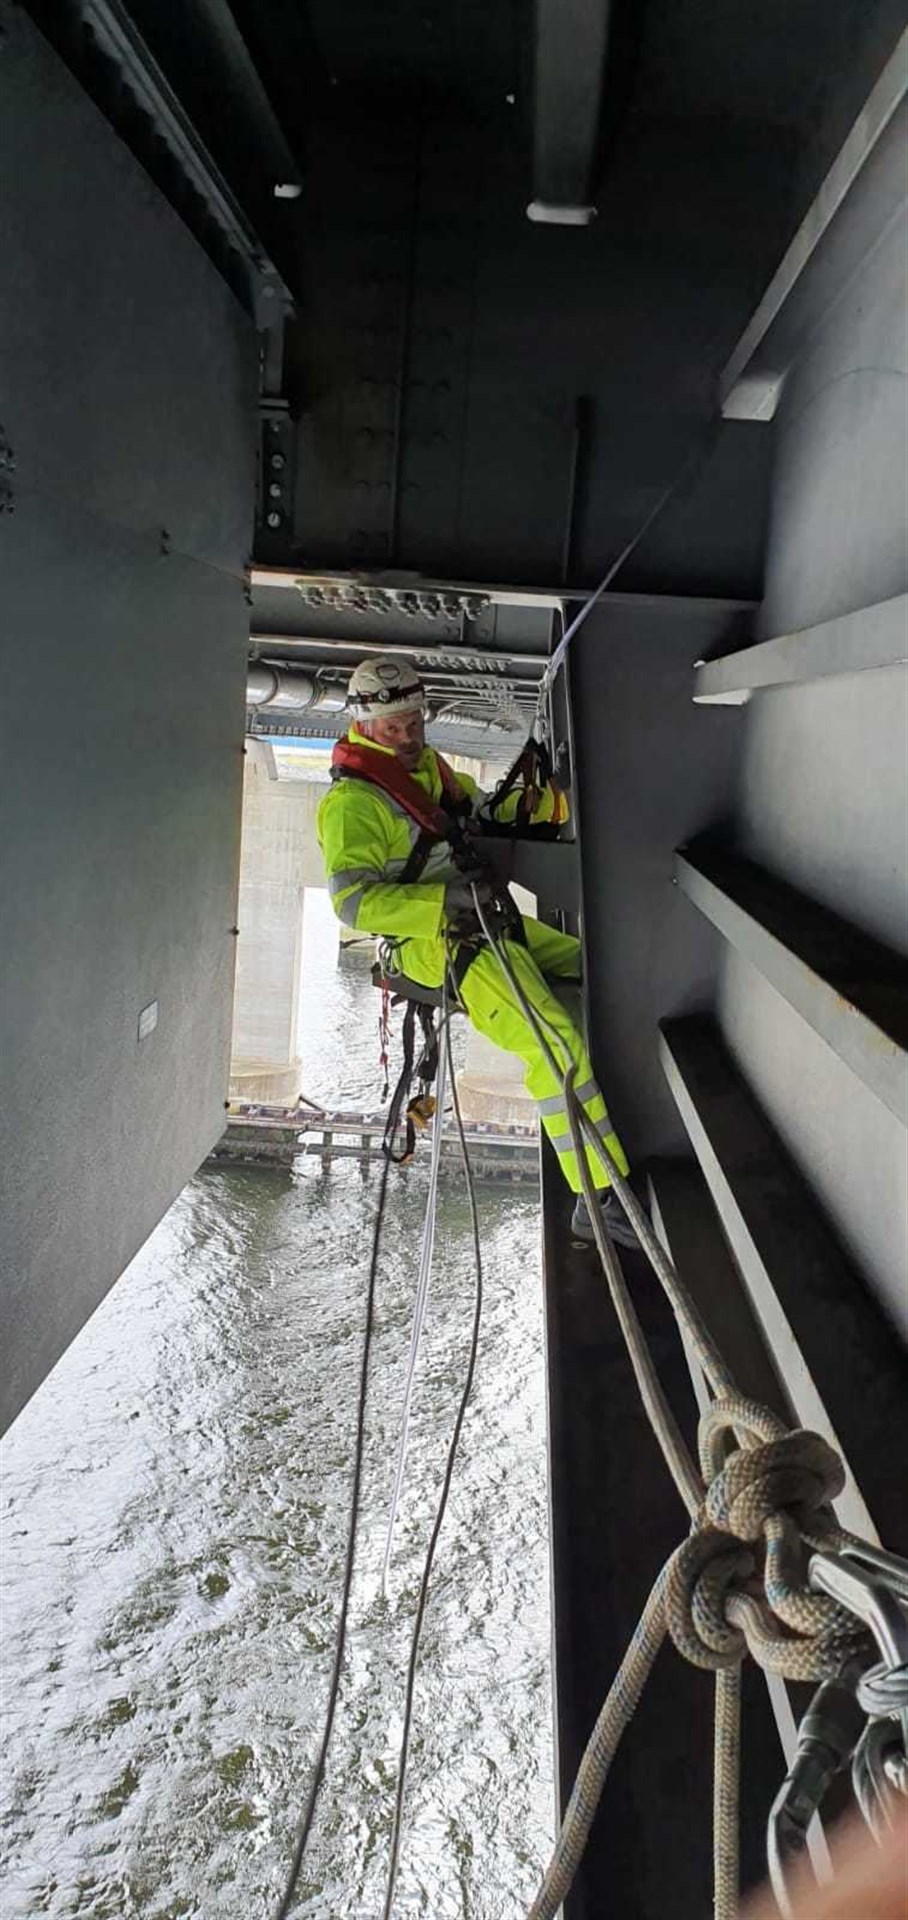 Contractors carried out the specialist repairs to the pipe which runs beneath the Kessock Bridge's road deck.